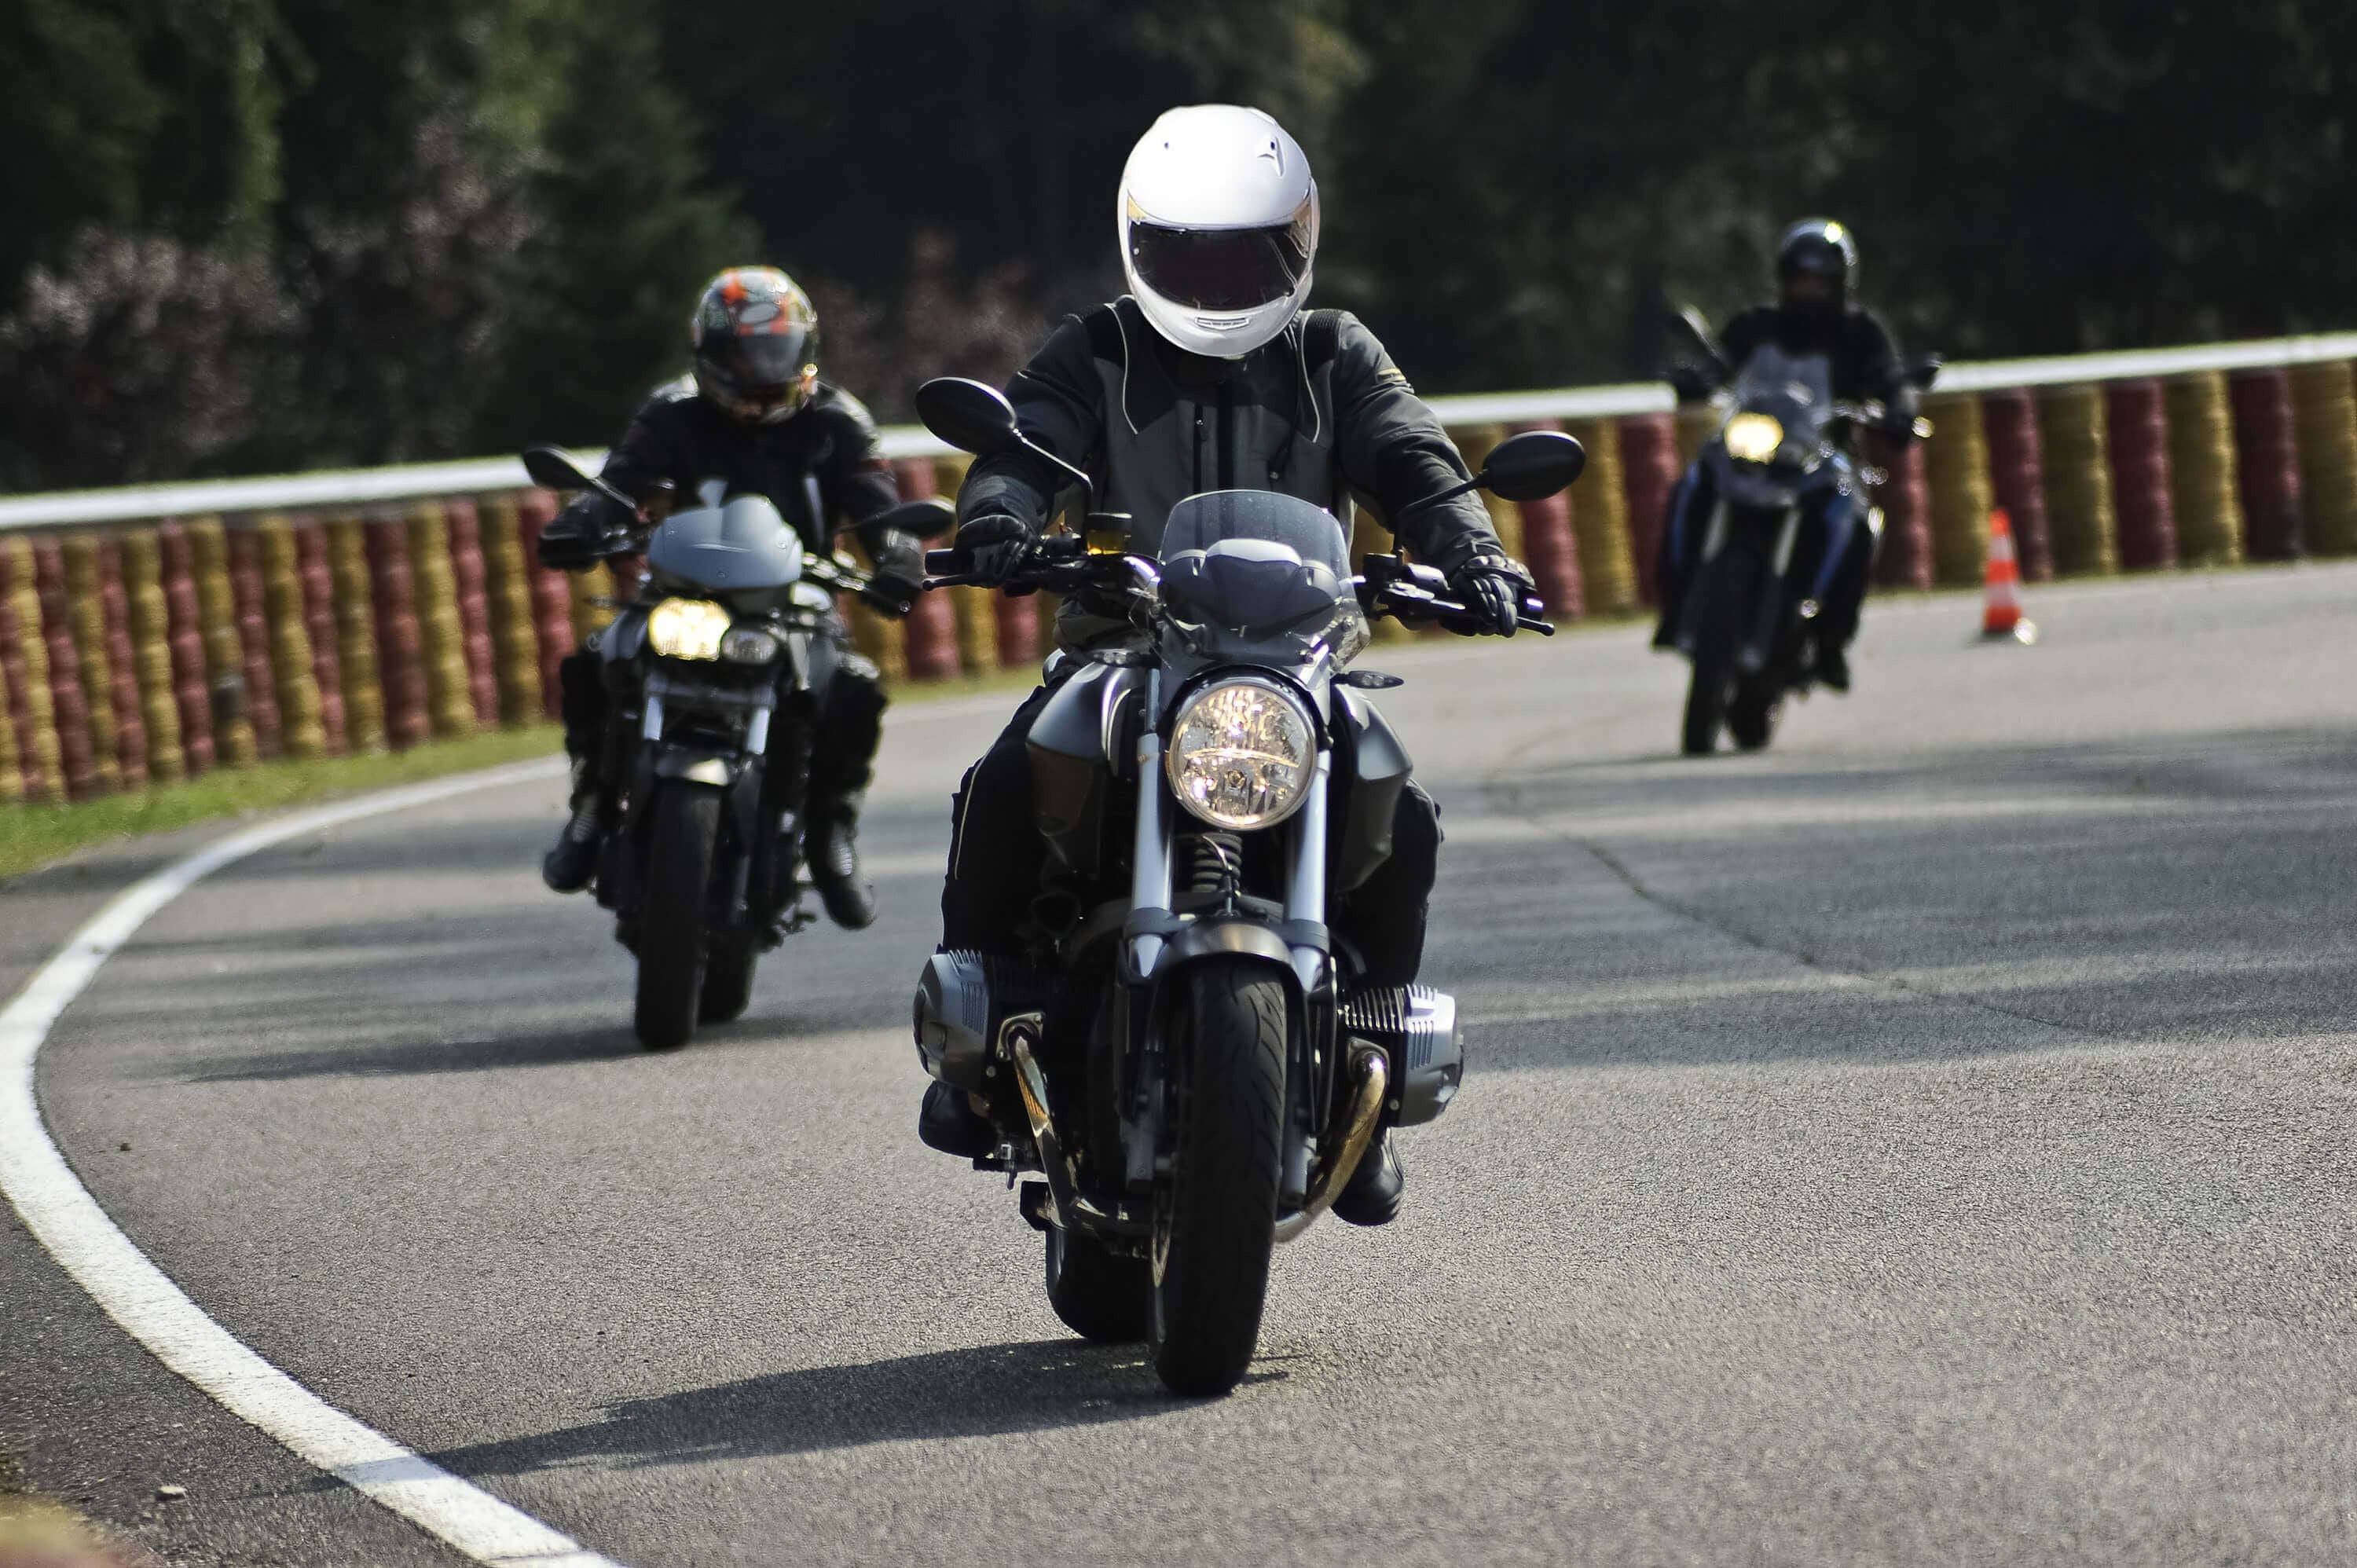 10 Things All Car & Truck Drivers Should Know About Motorcycles